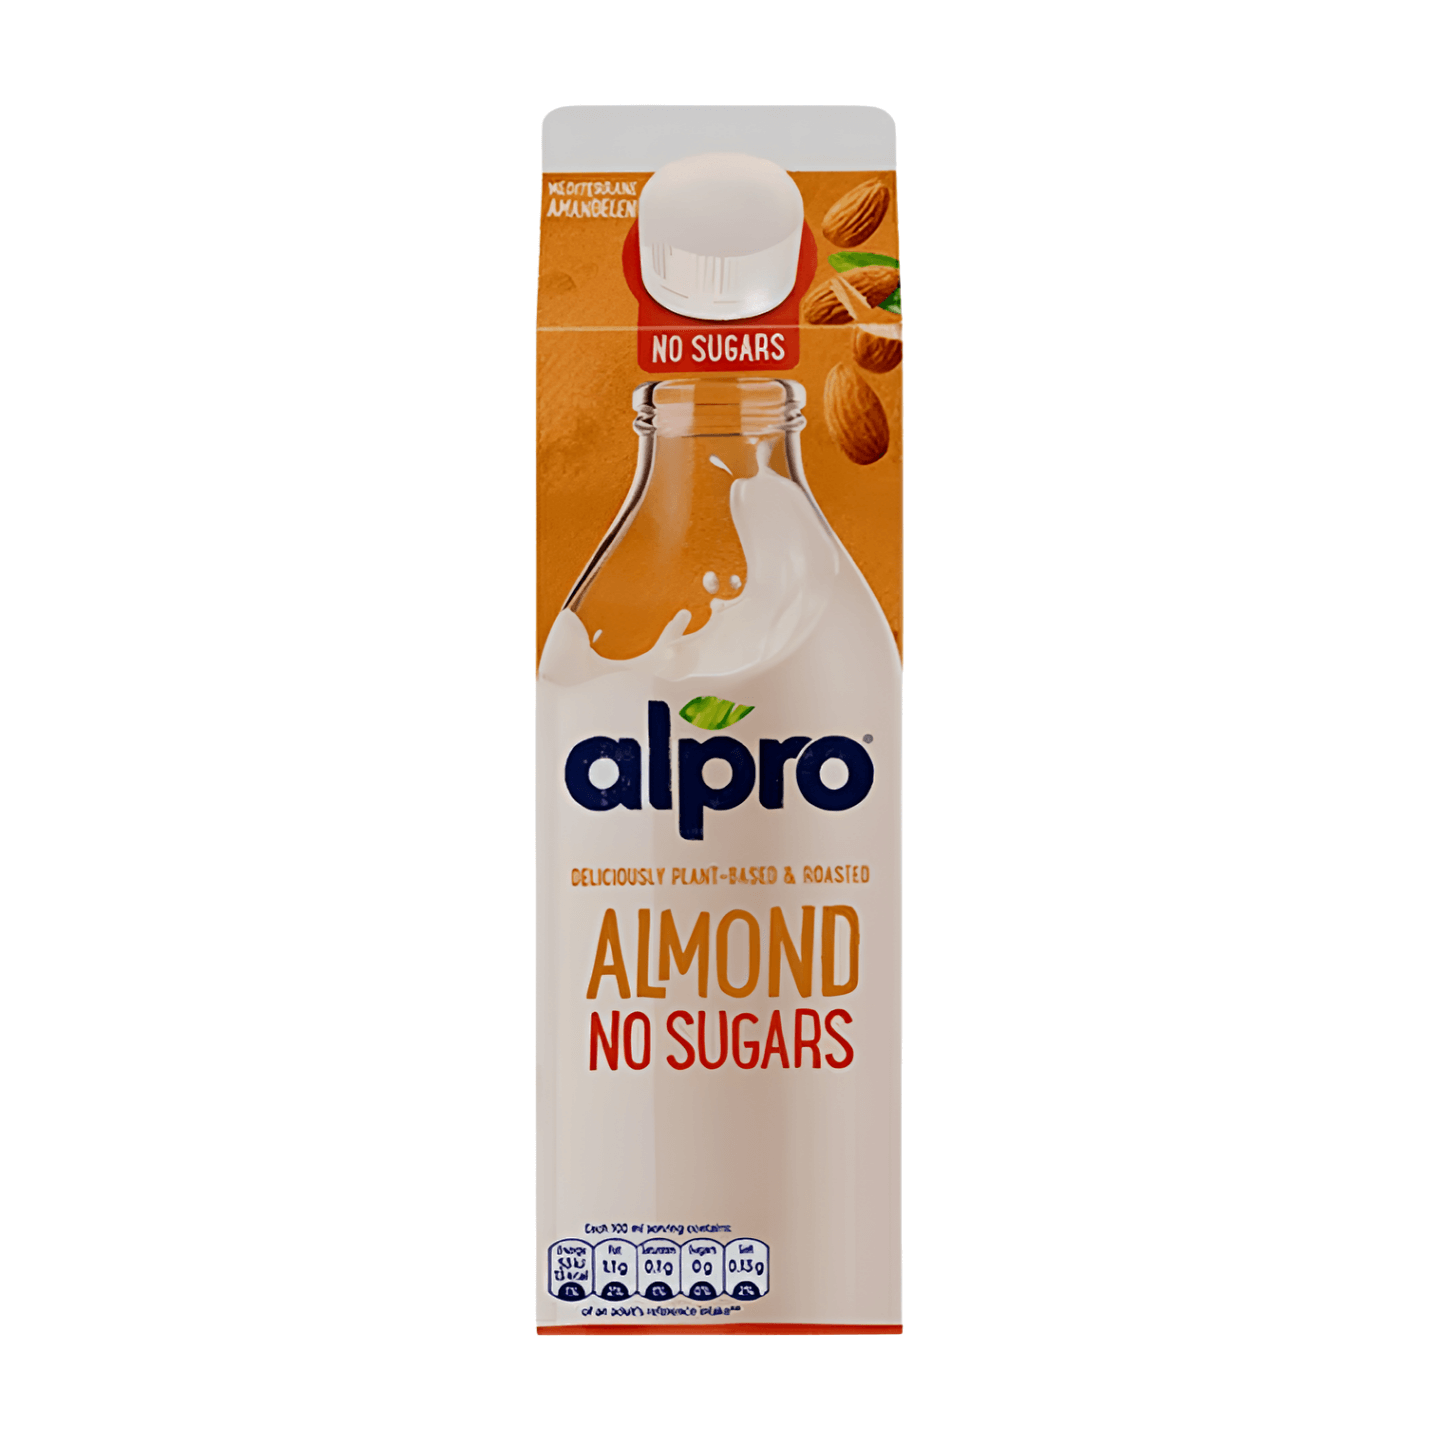 Alpro Almond Roasted No Sugars Chilled